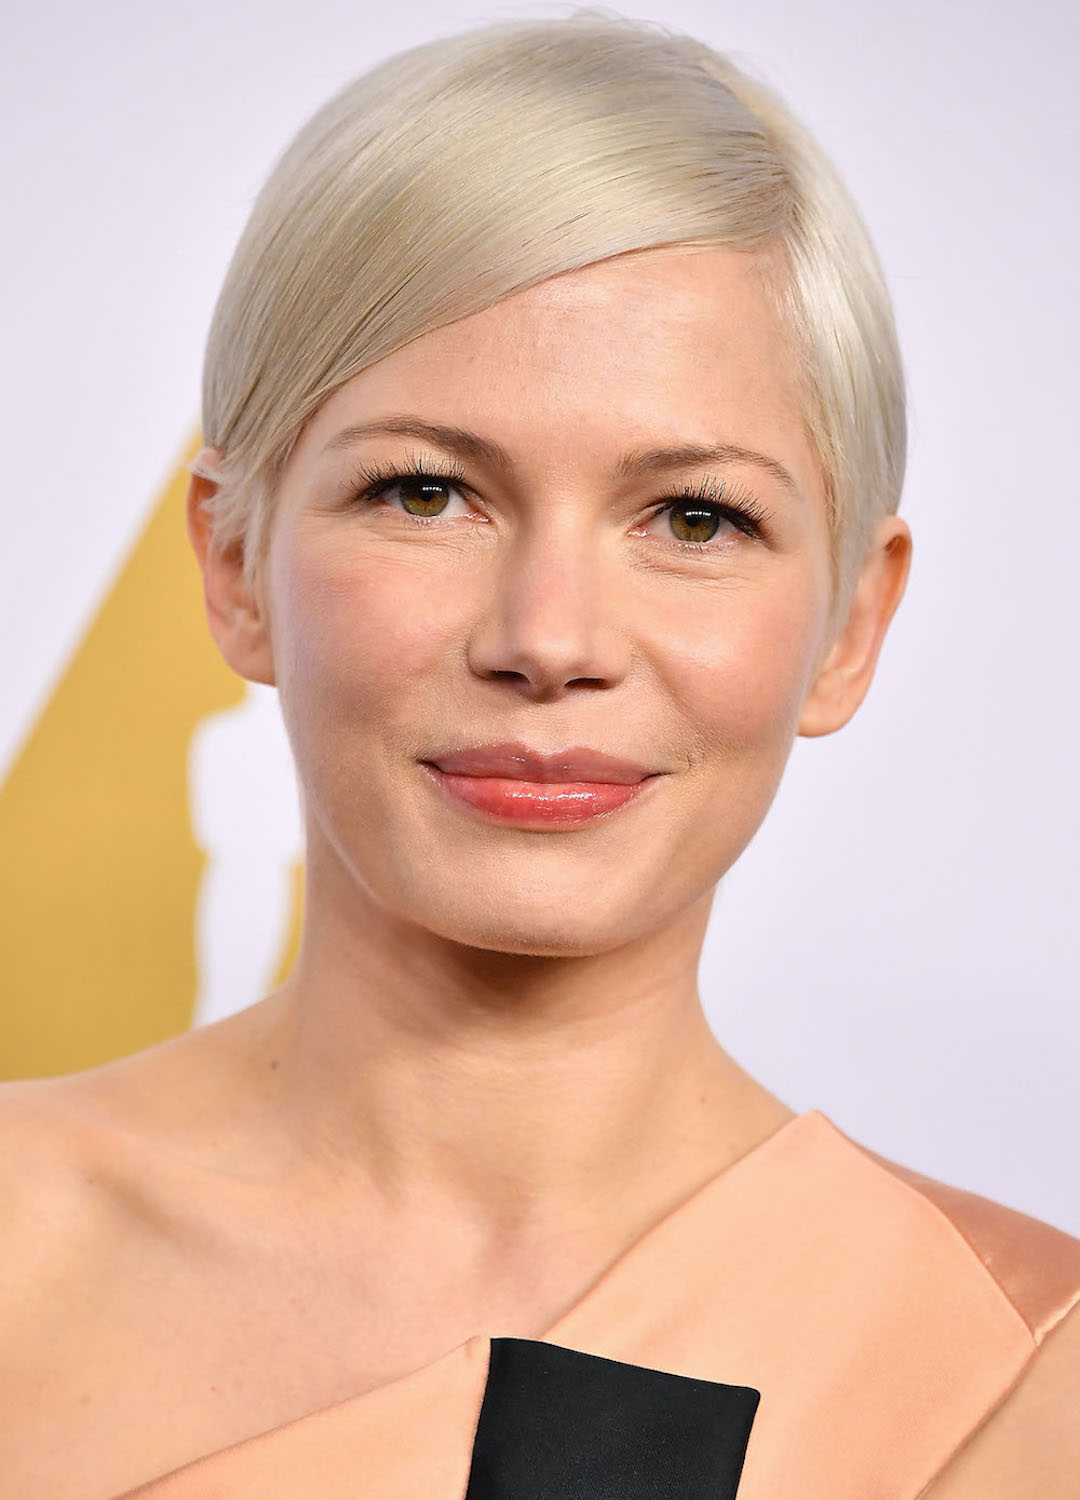 Michelle Williams arrives at the 89th Annual Academy Awards Nominee Luncheon at The Beverly Hilton Hotel on February 6, 2017 in Beverly Hills, California